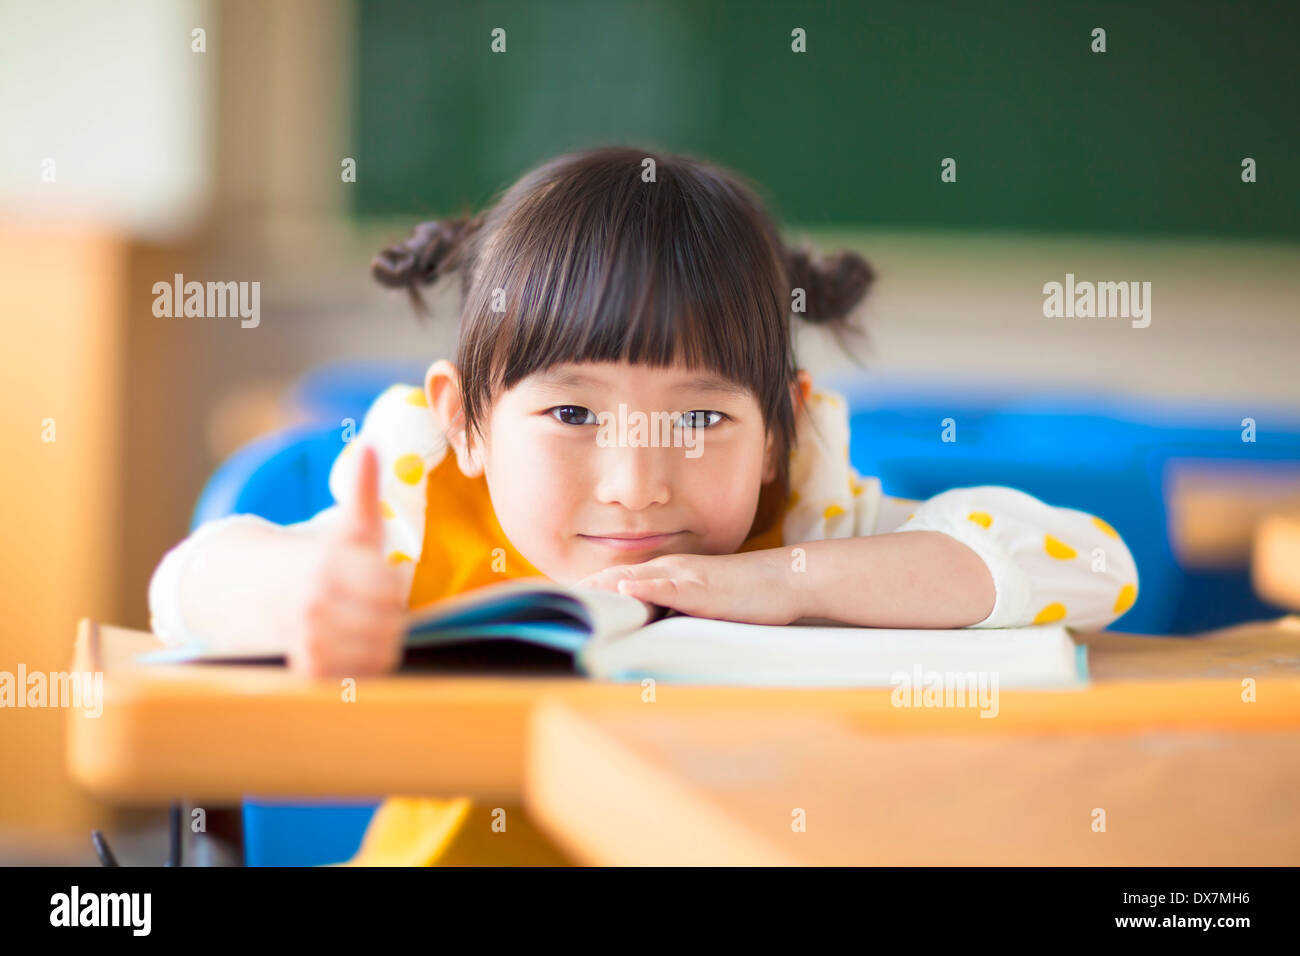 smiling kid lie prone on a desk and thumb up in a classroom Stock Photo